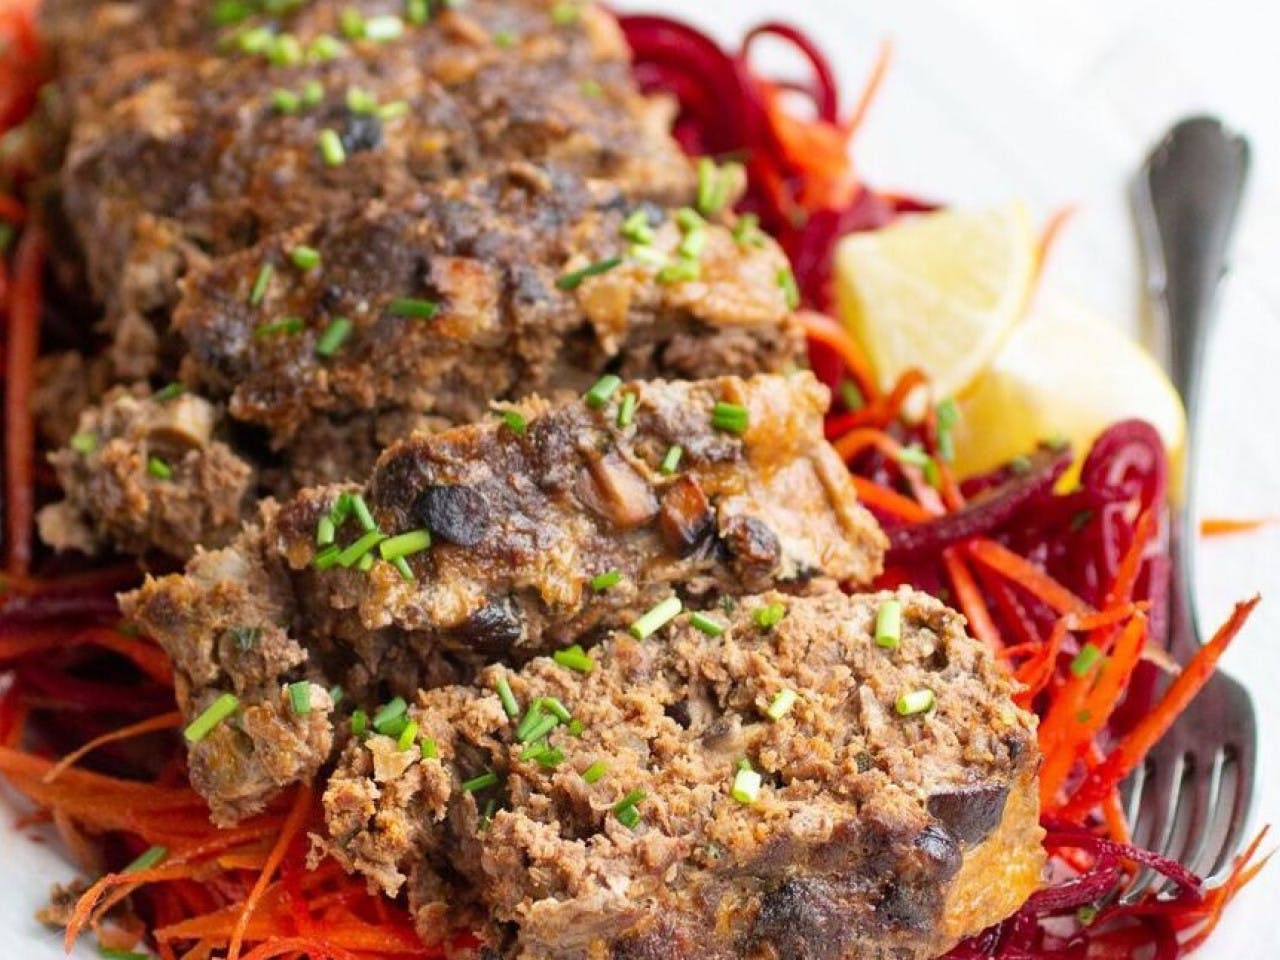 Meatloaf with carrot salad